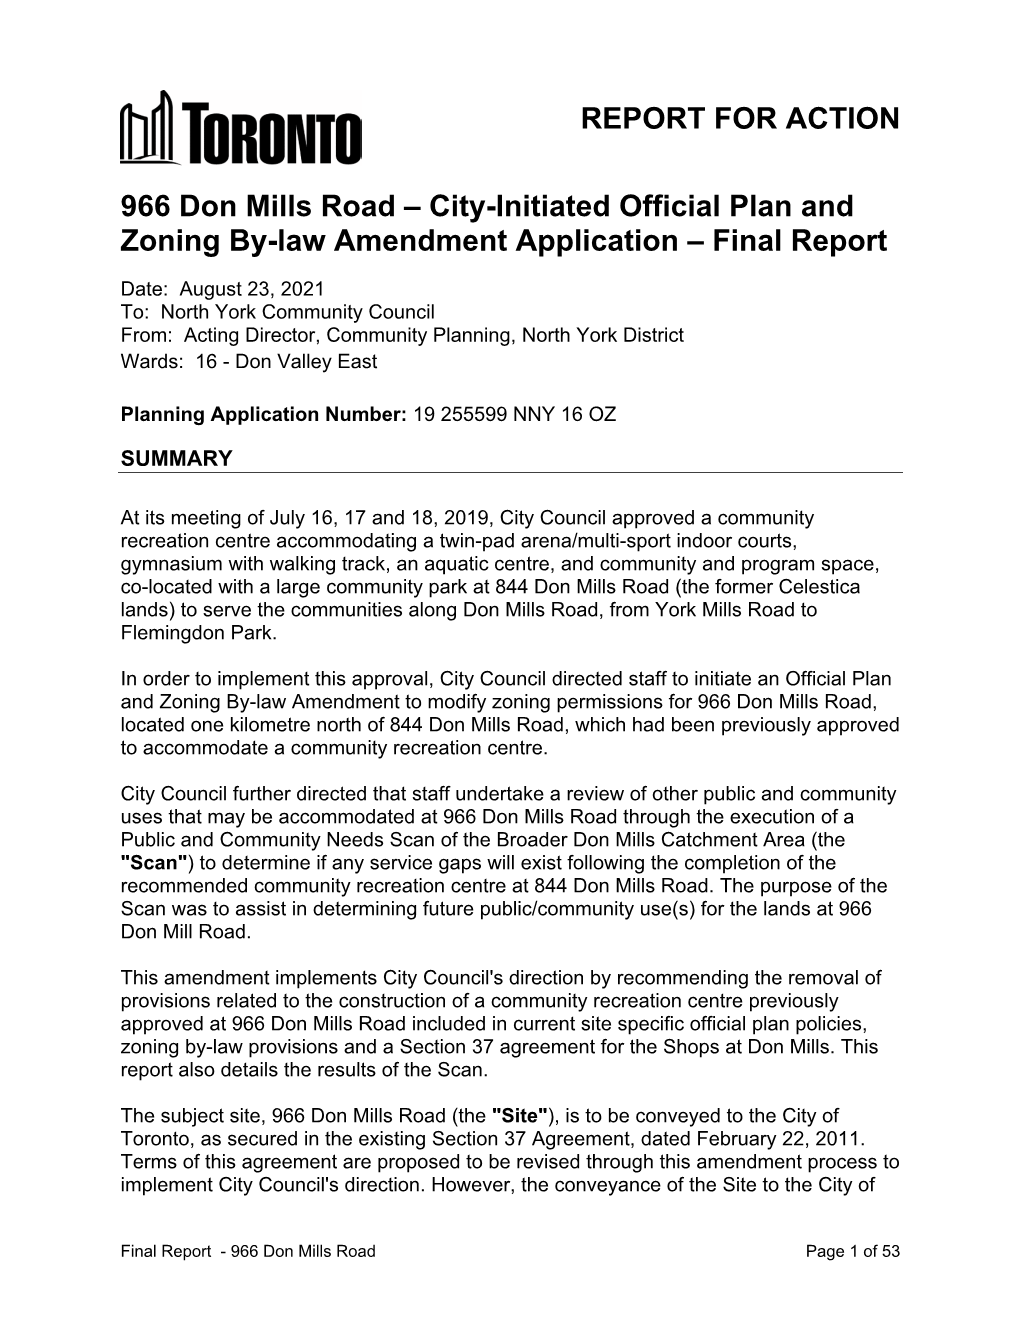 966 Don Mills Road – City-Initiated Official Plan and Zoning By-Law Amendment Application – Final Report